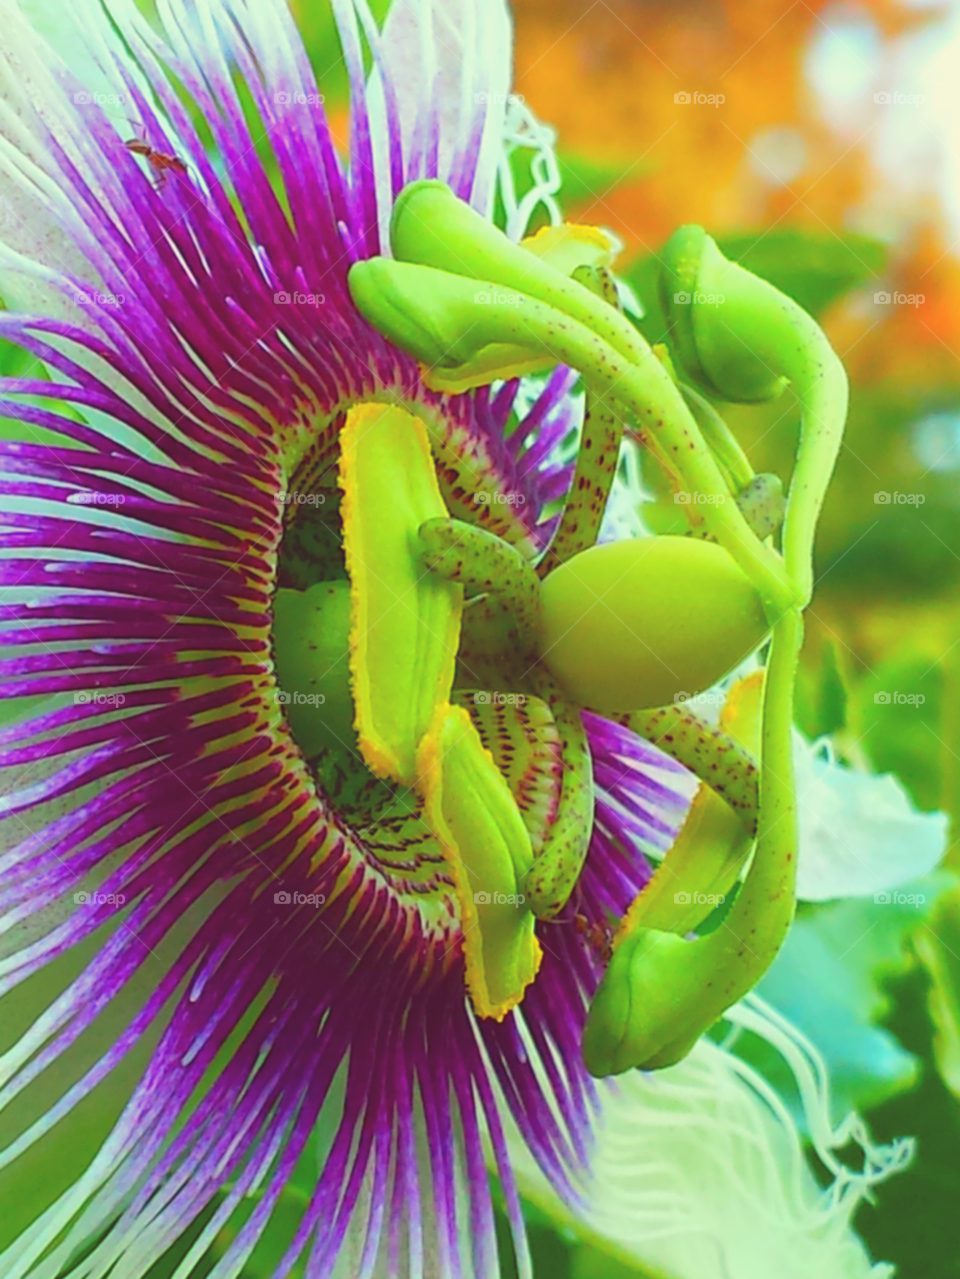 "Pink Passion Flower"